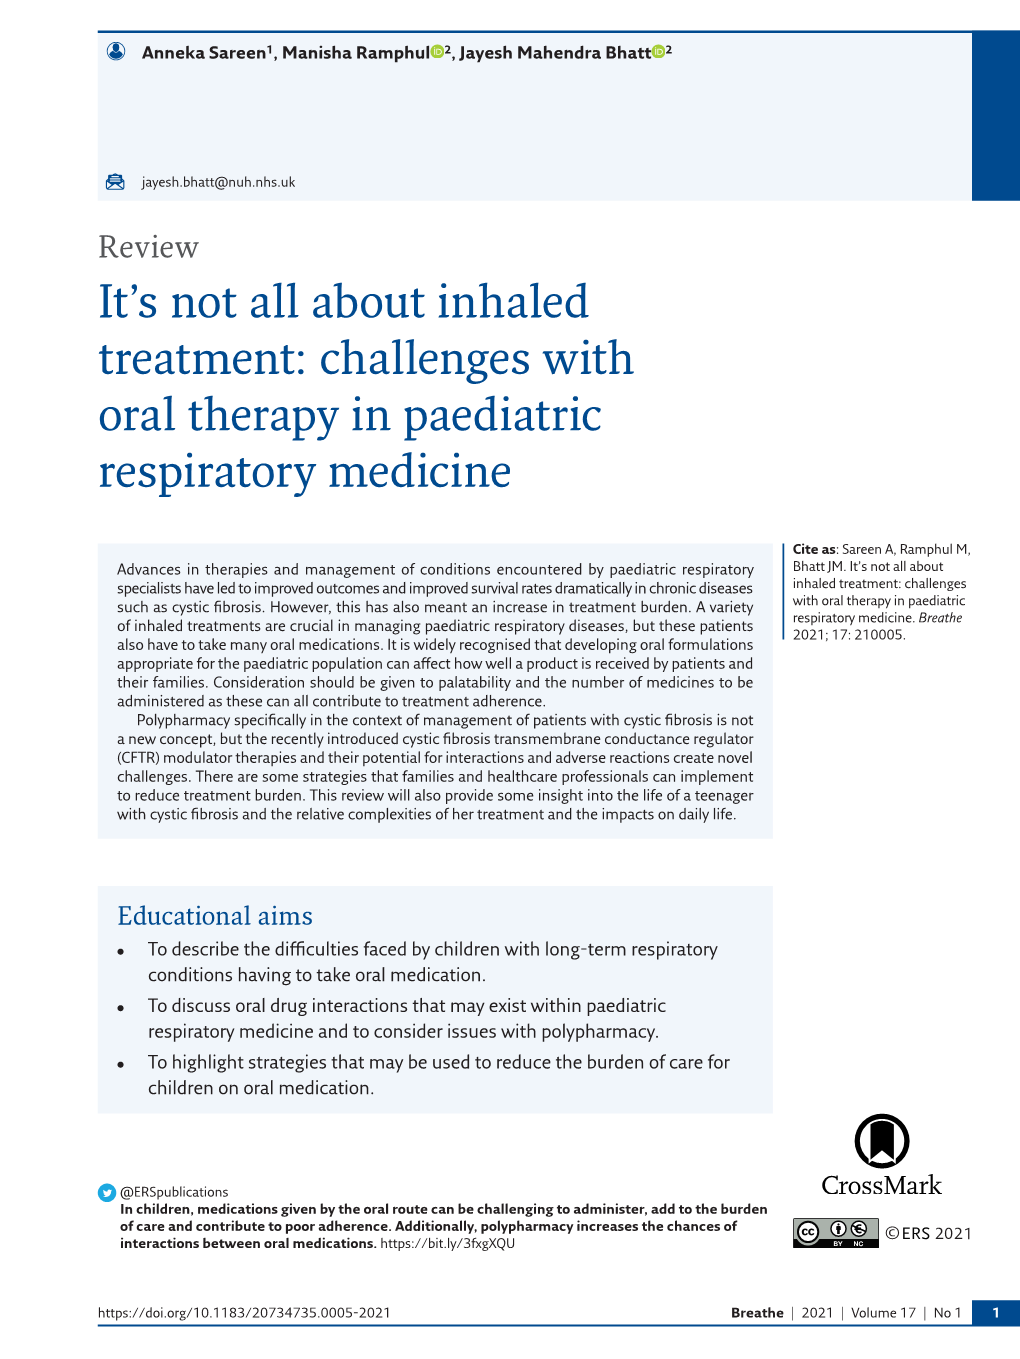 Challenges with Oral Therapy in Paediatric Respiratory Medicine